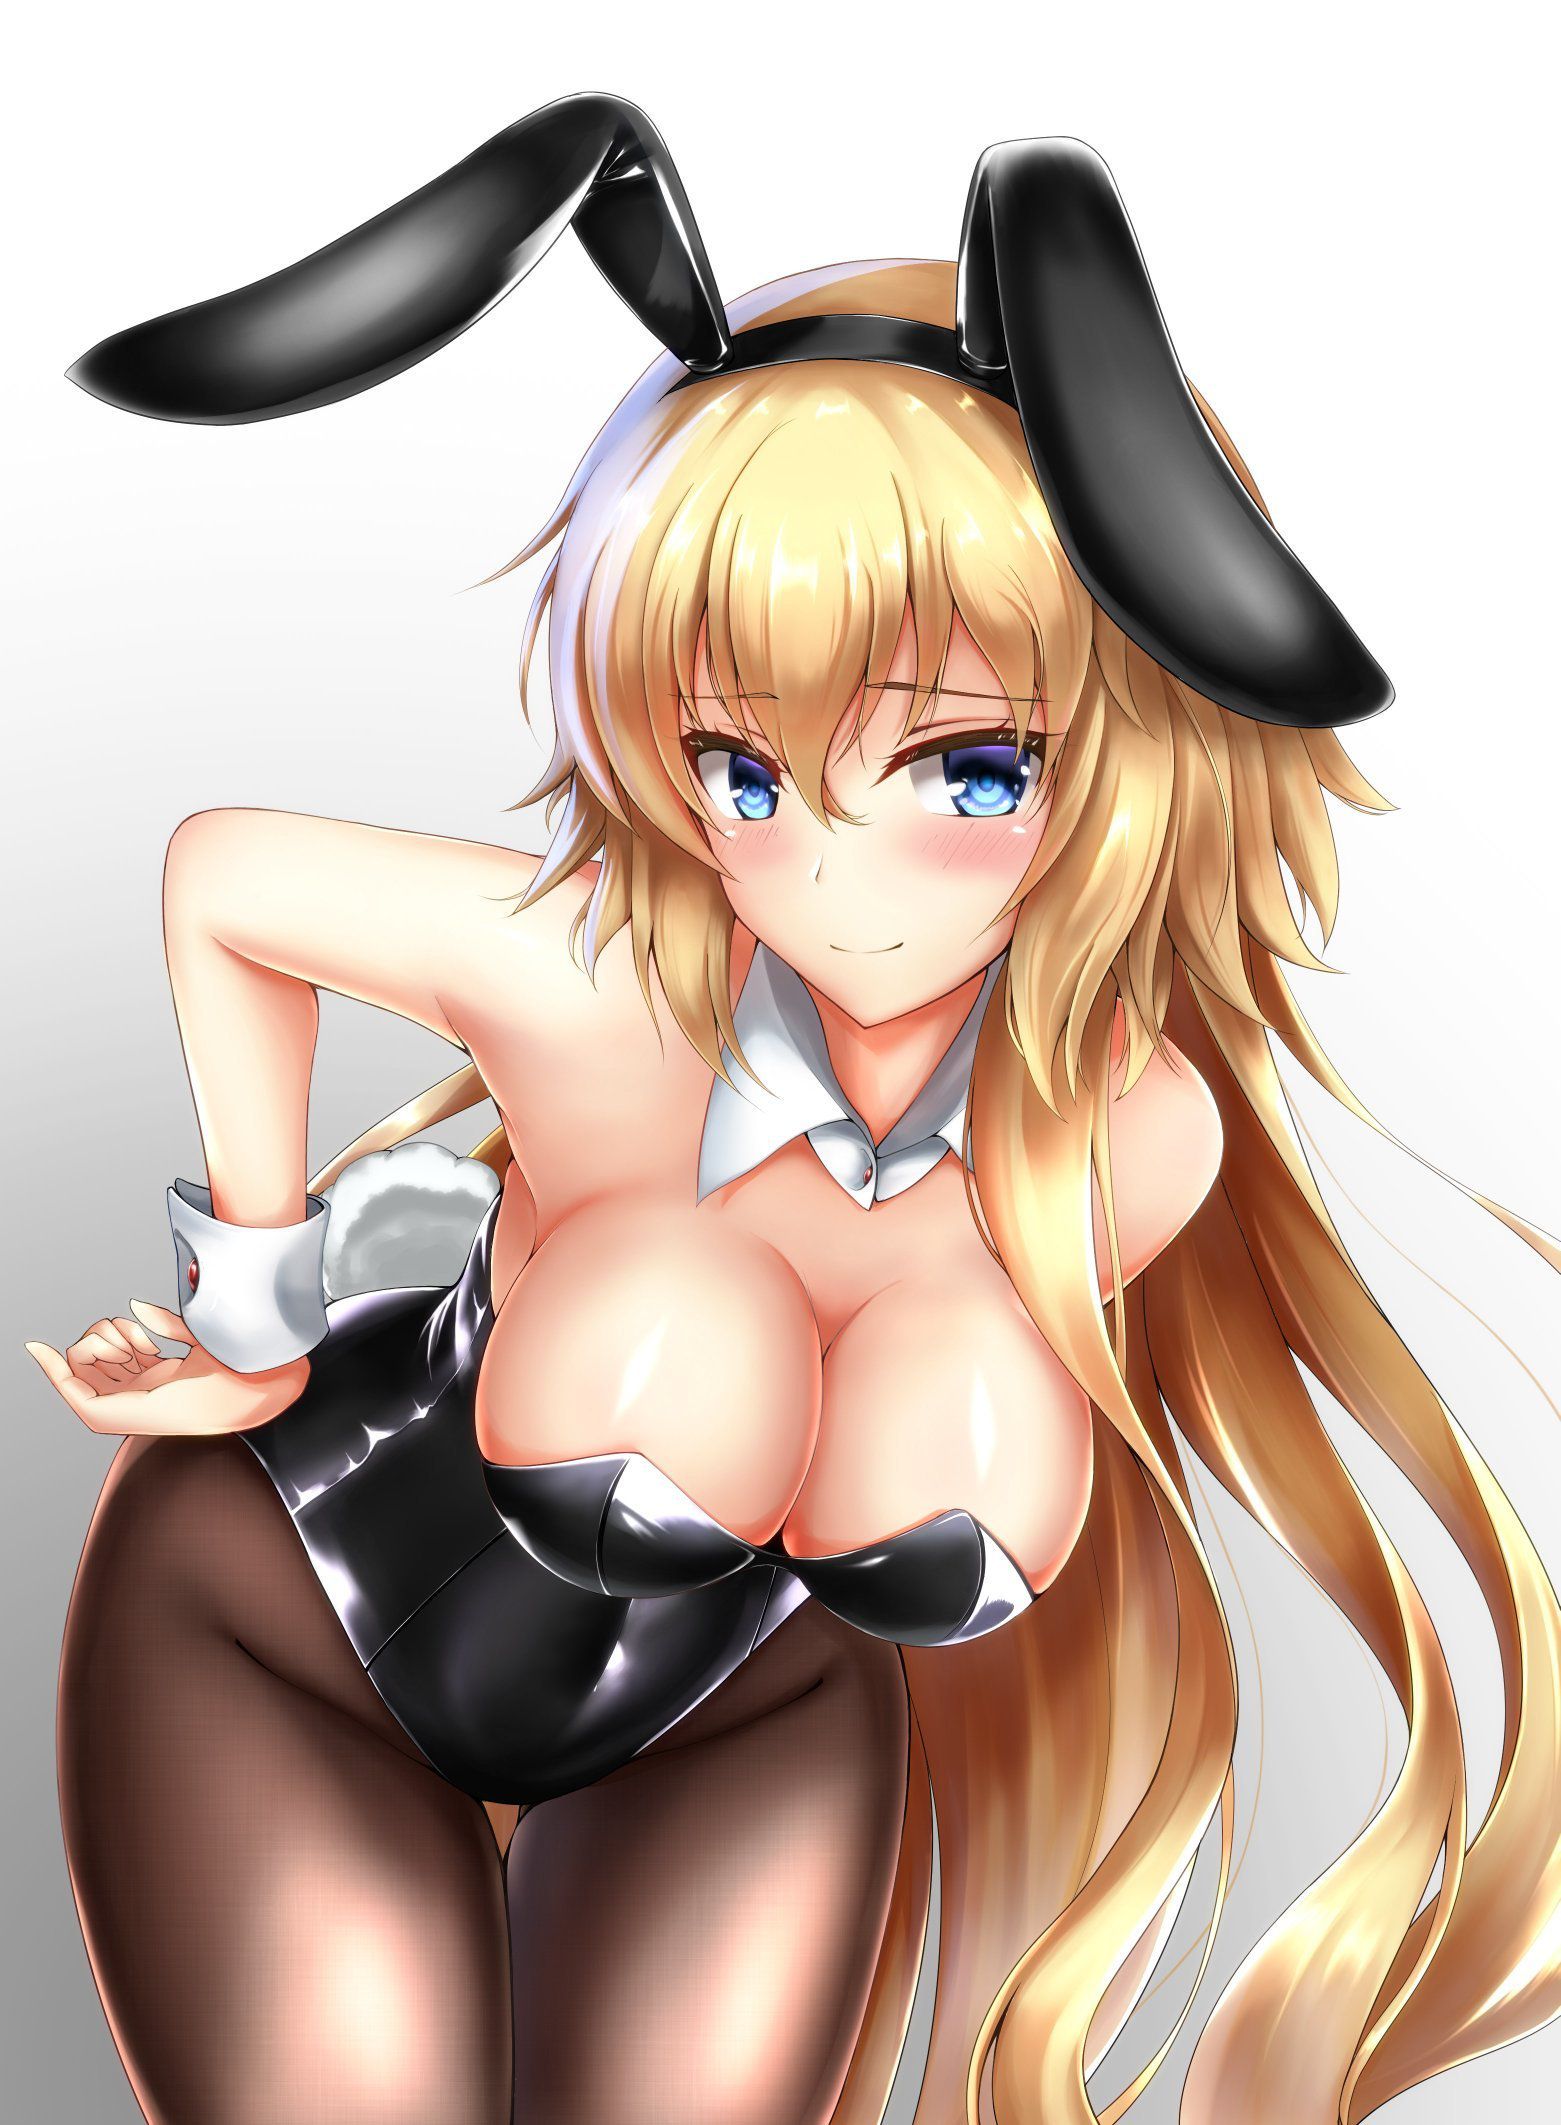 It was life that I wanted to keep a girl in a cute bunny girl costume ... Two-dimensional erotic image that seems to be 16